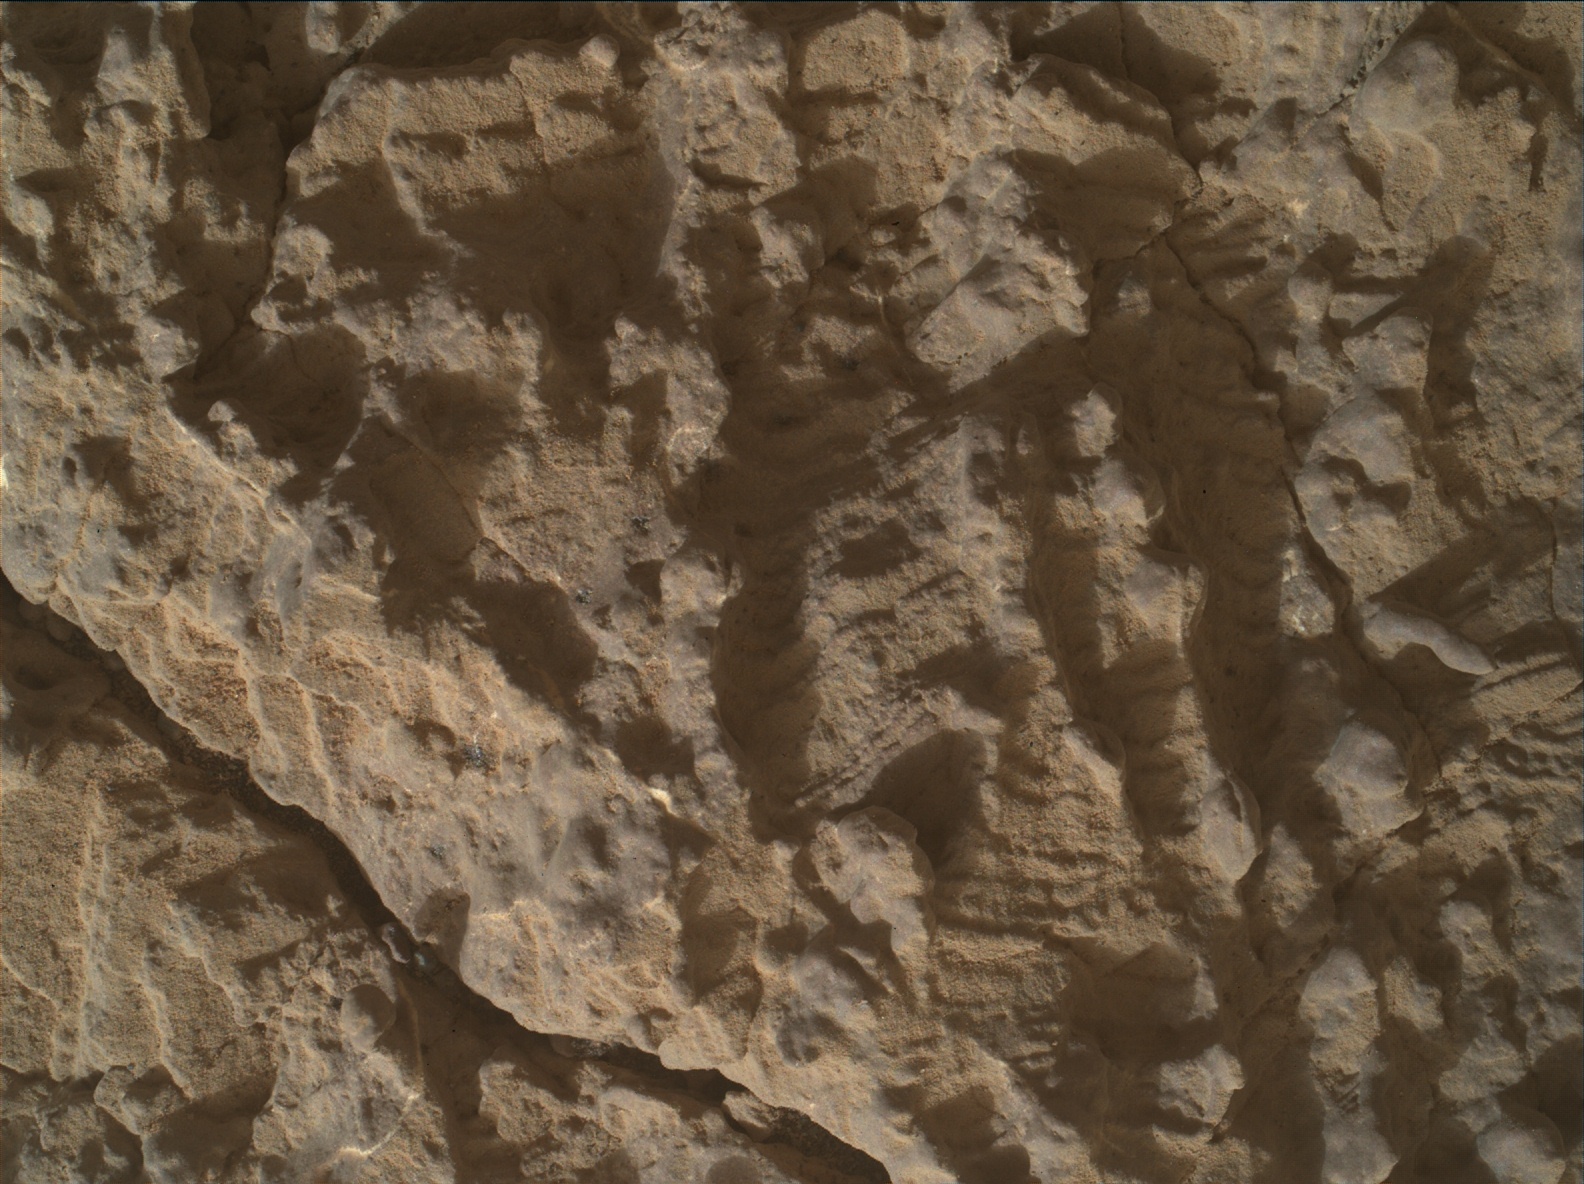 Nasa's Mars rover Curiosity acquired this image using its Mars Hand Lens Imager (MAHLI) on Sol 2451